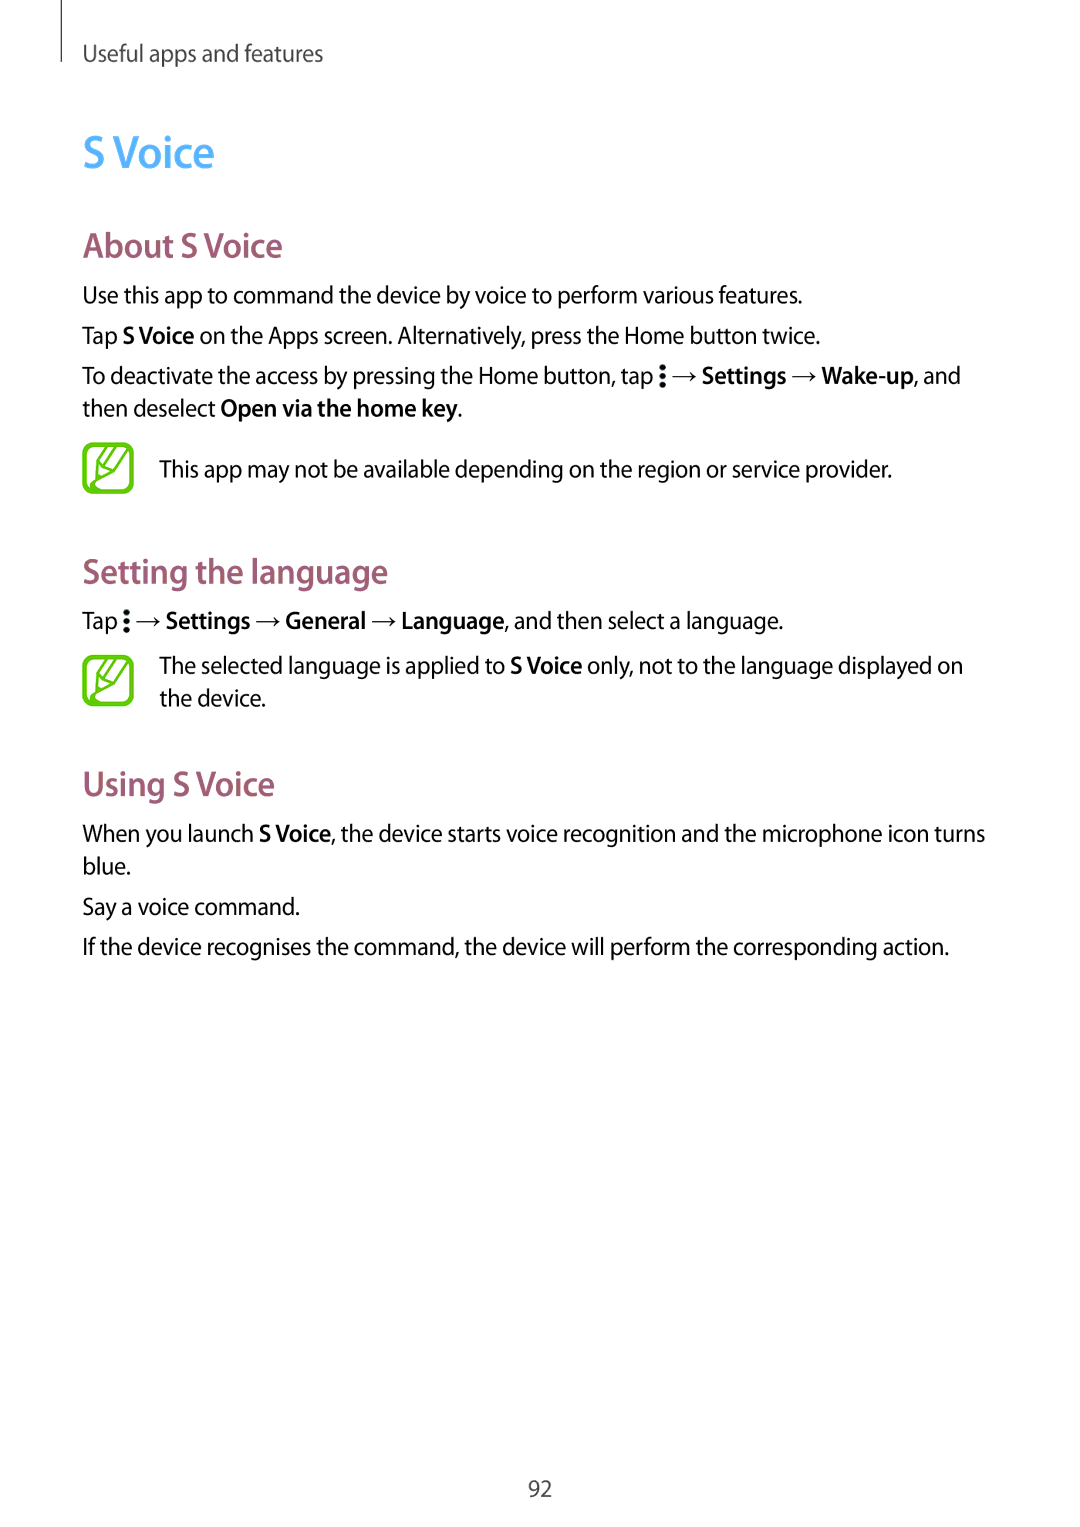 Samsung SM-T800NTSASER, SM-T800NZWAEUR, SM-T800NTSAATO manual About S Voice, Setting the language, Using S Voice 